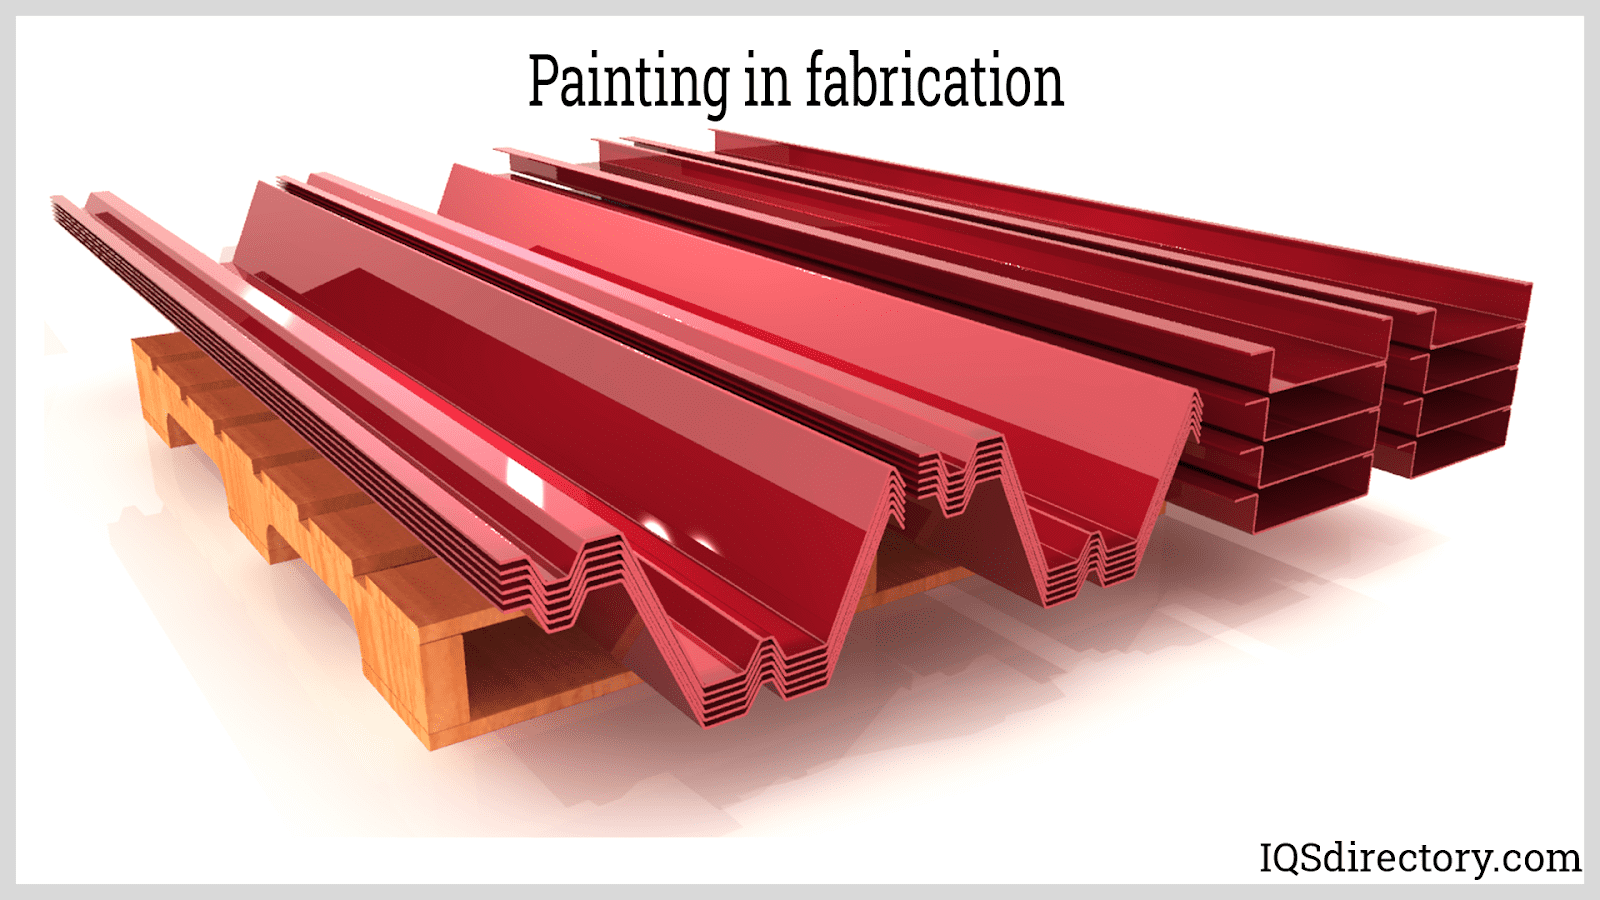 Painting in fabrication